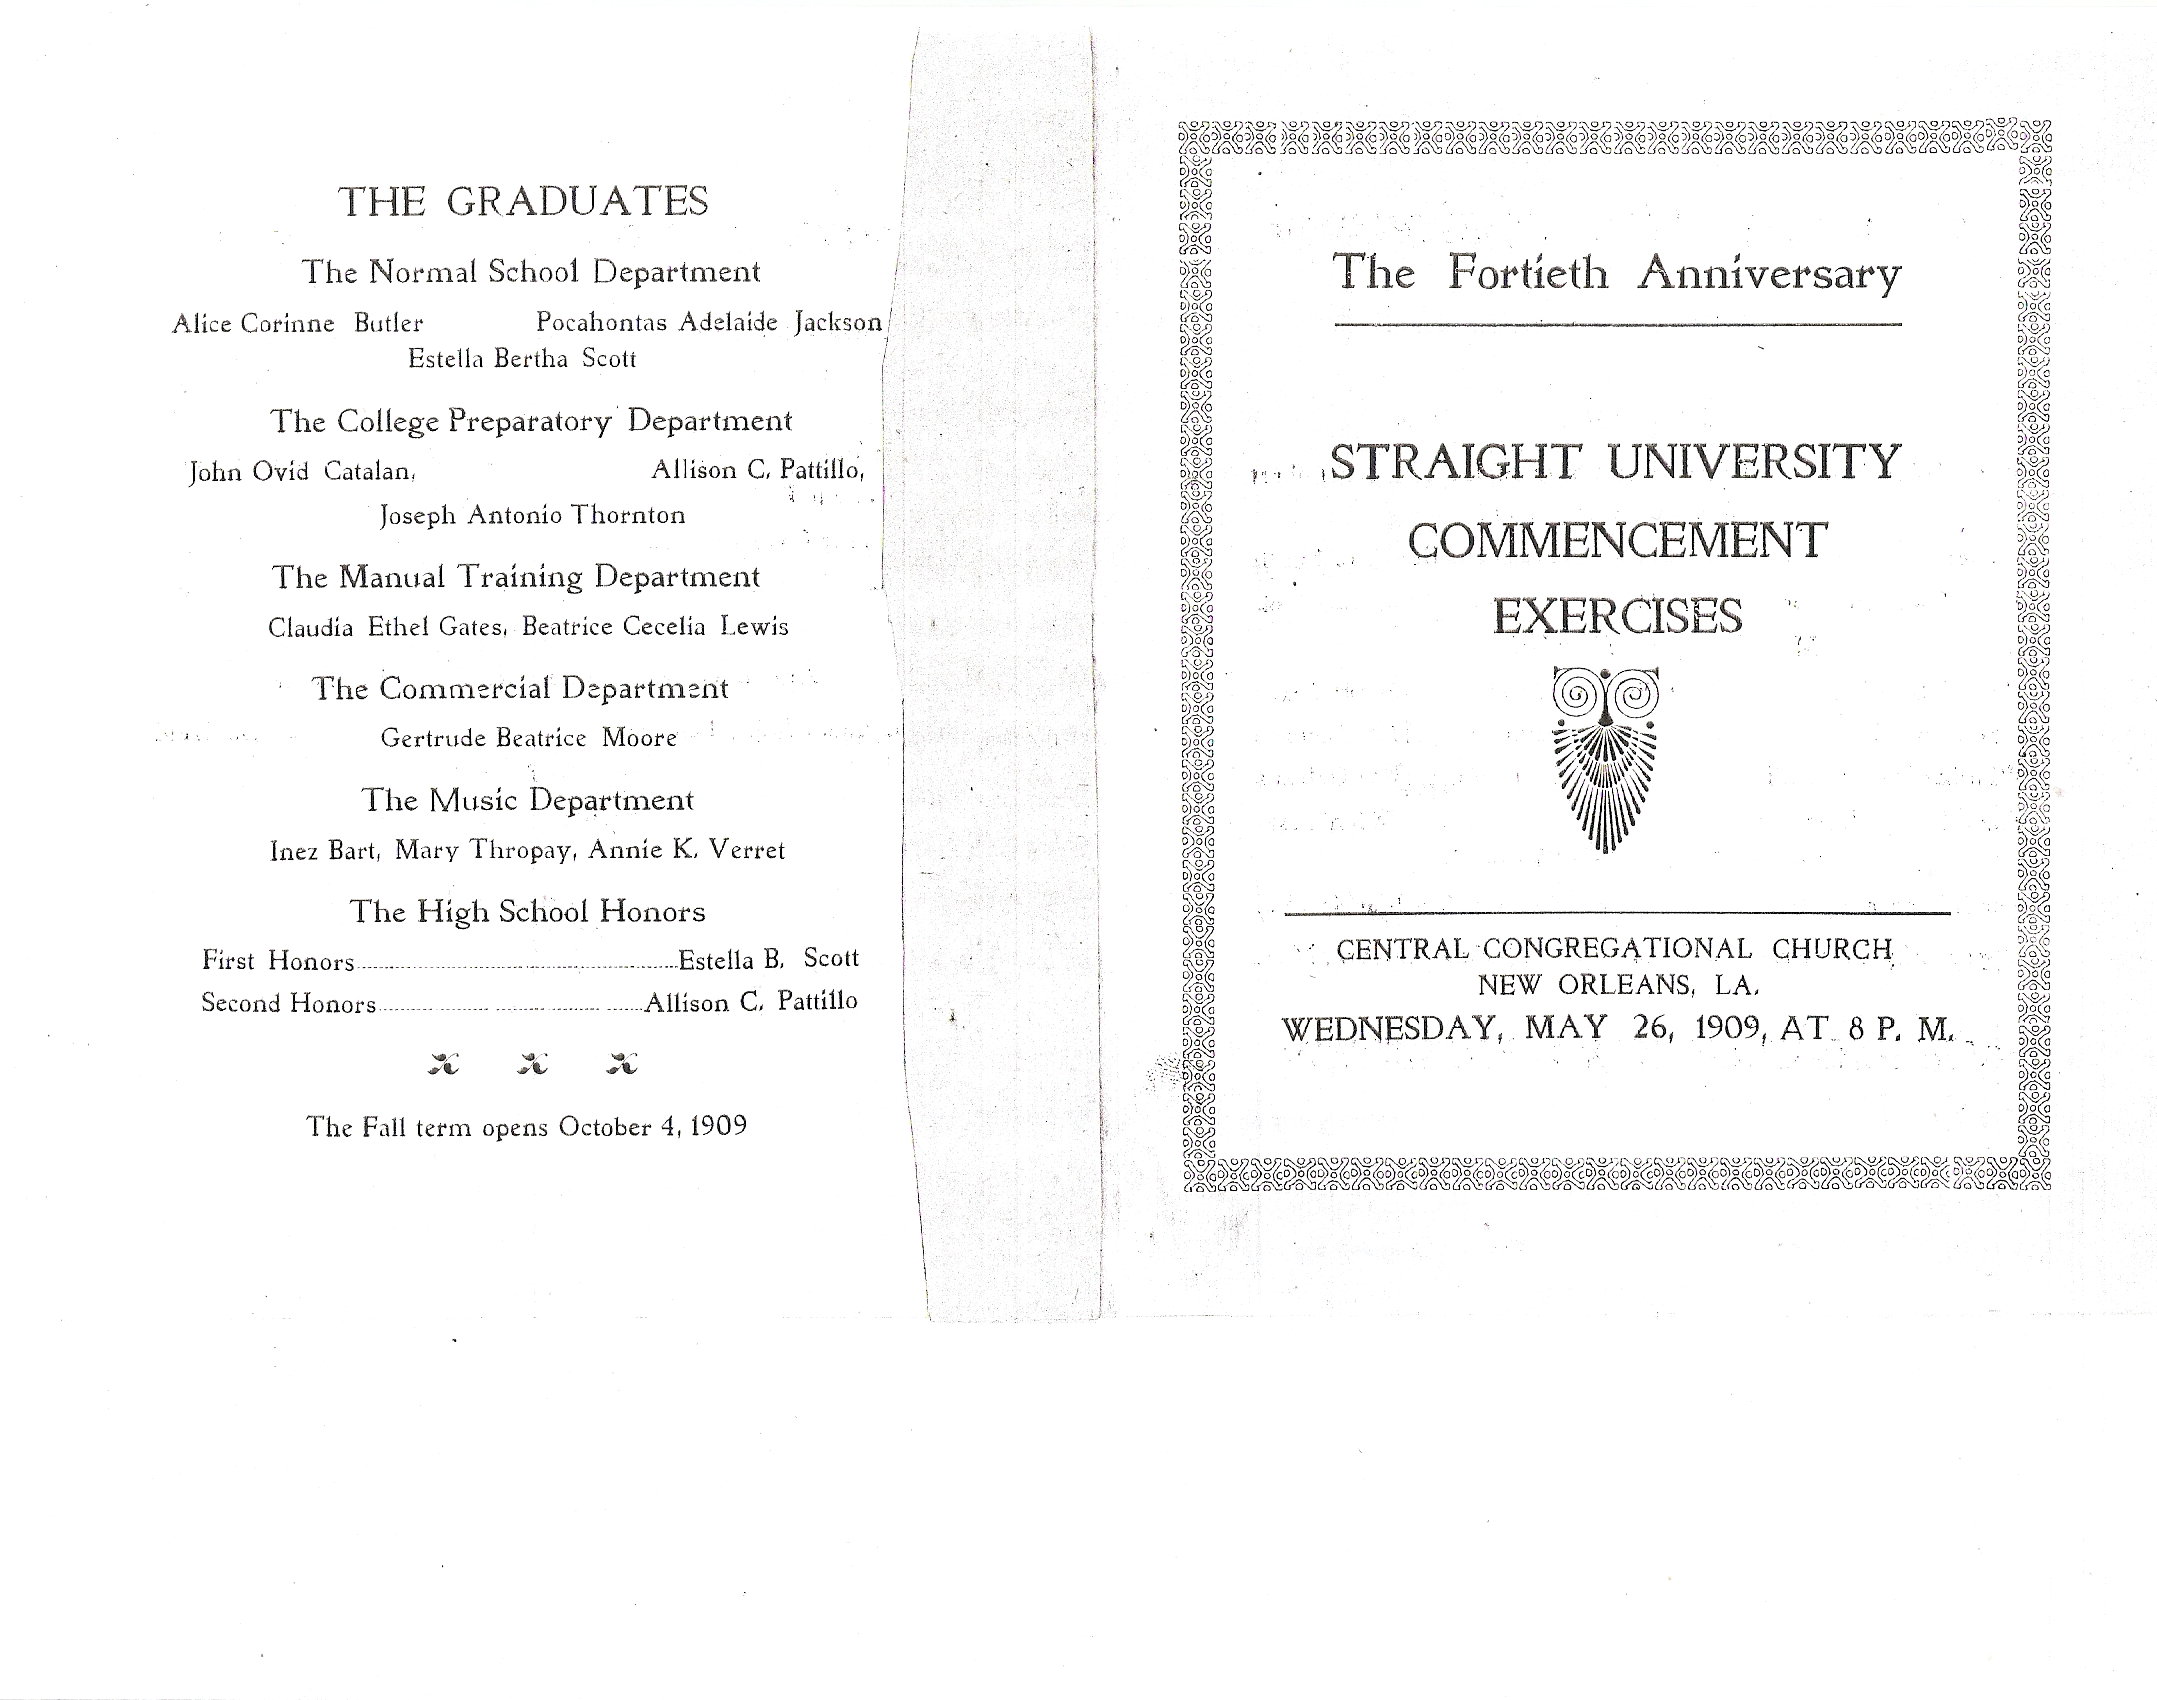 1909 Commencement - Straight University, New Orleans